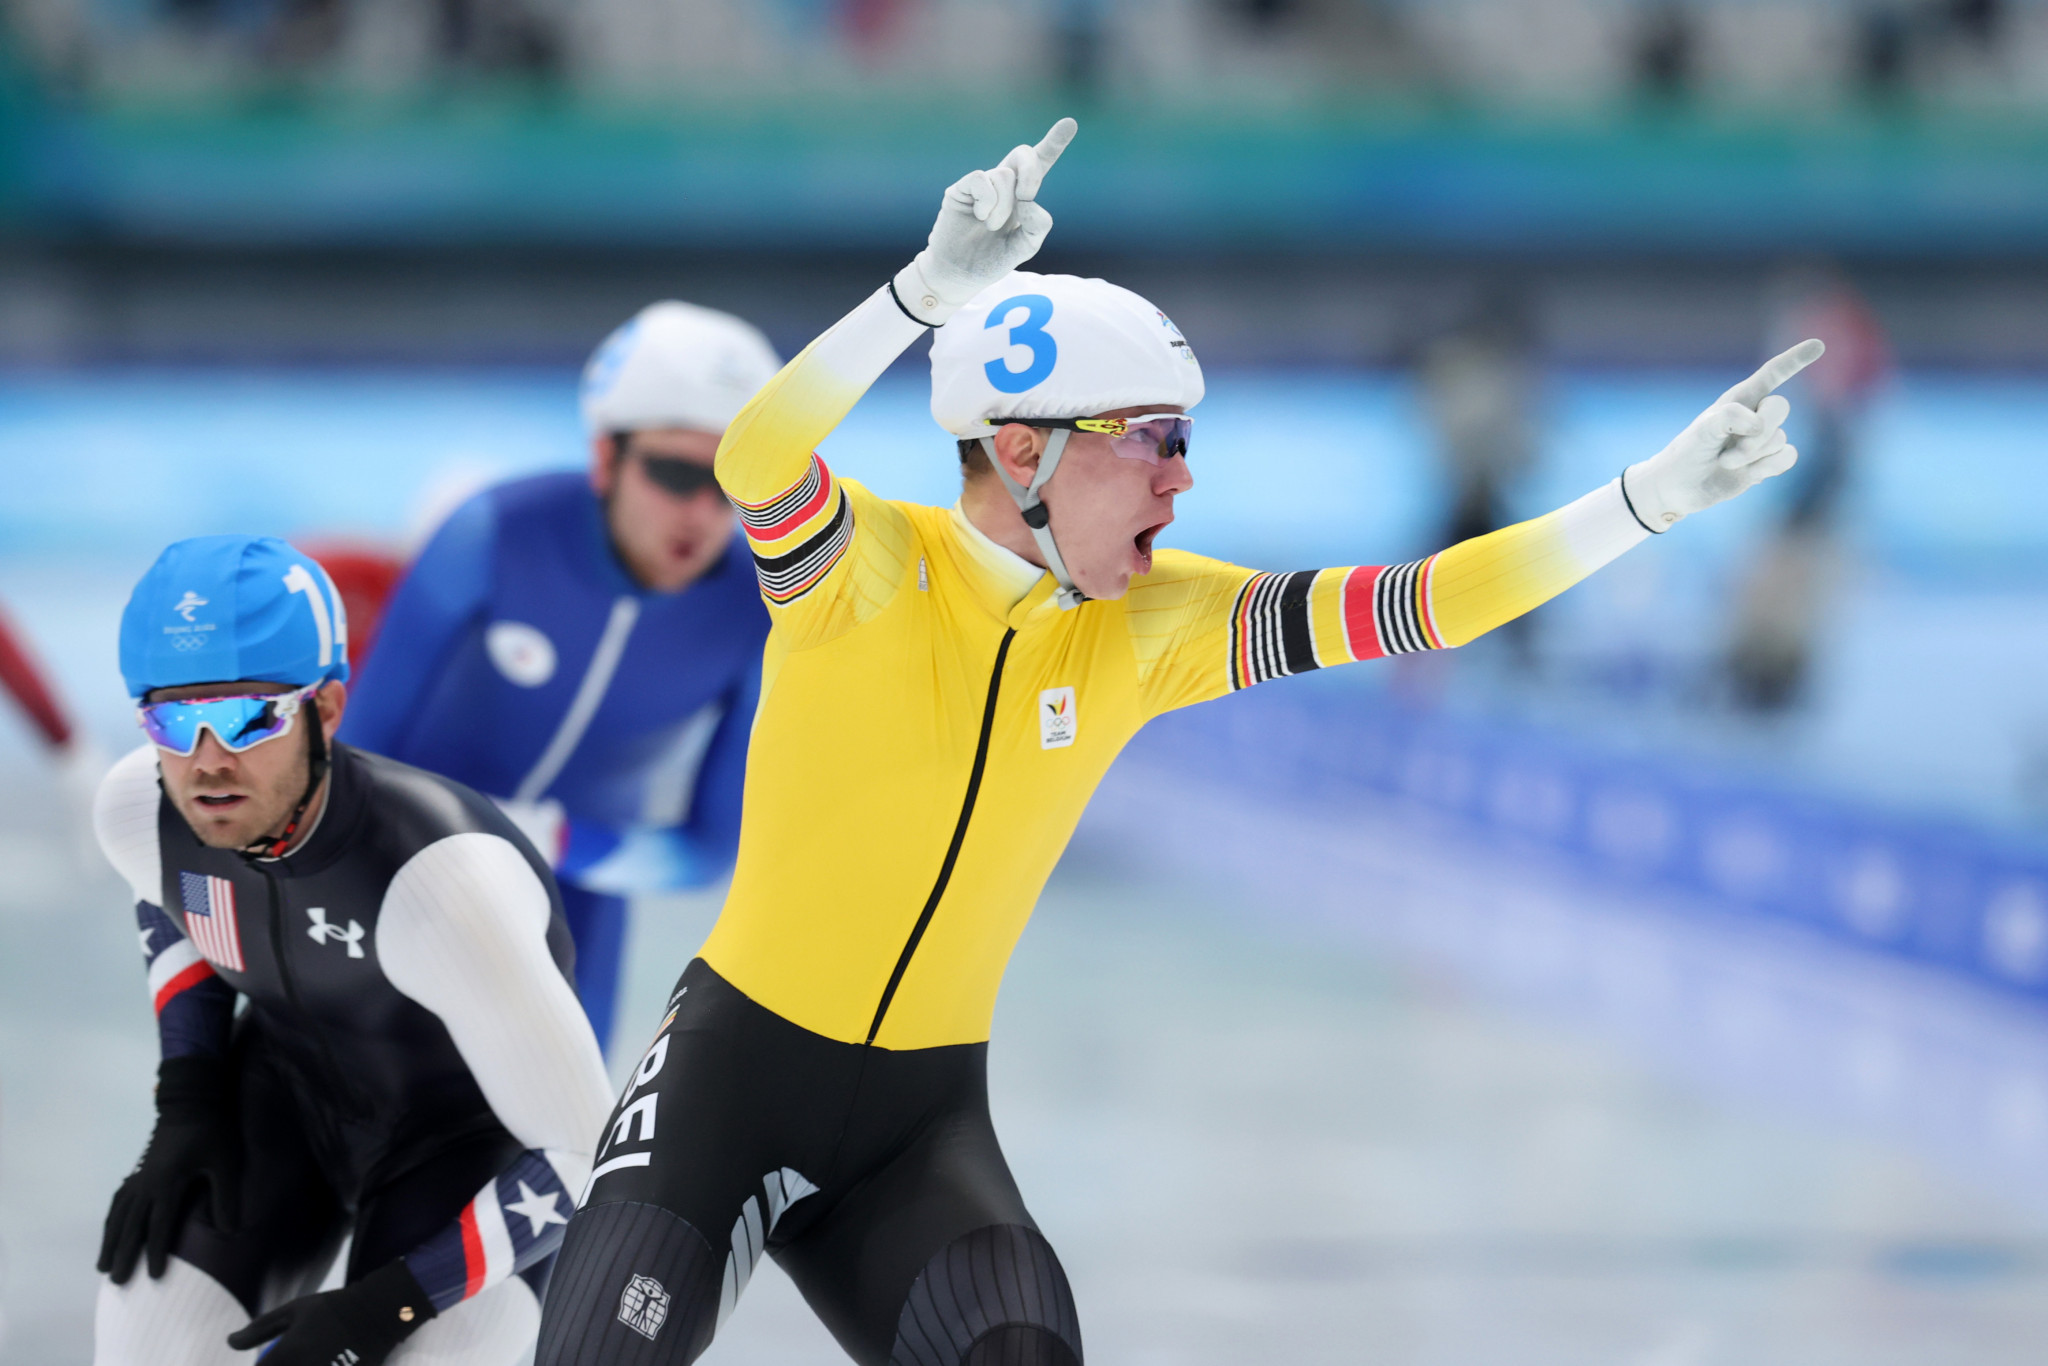 Belgium and Netherlands claim mass start golds on final day of speed skating at Beijing 2022